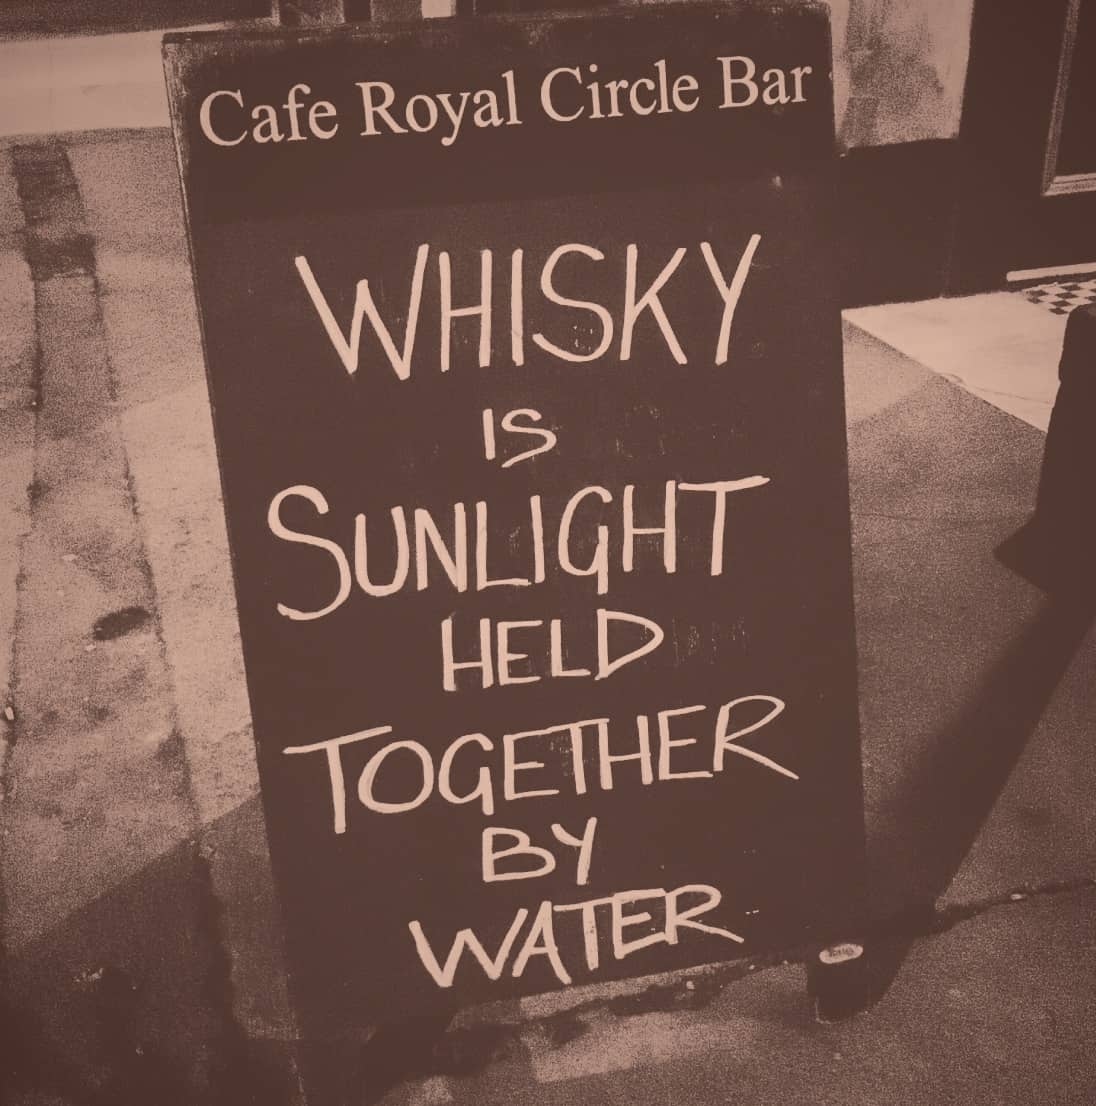 Whisky is sunlight held together by water